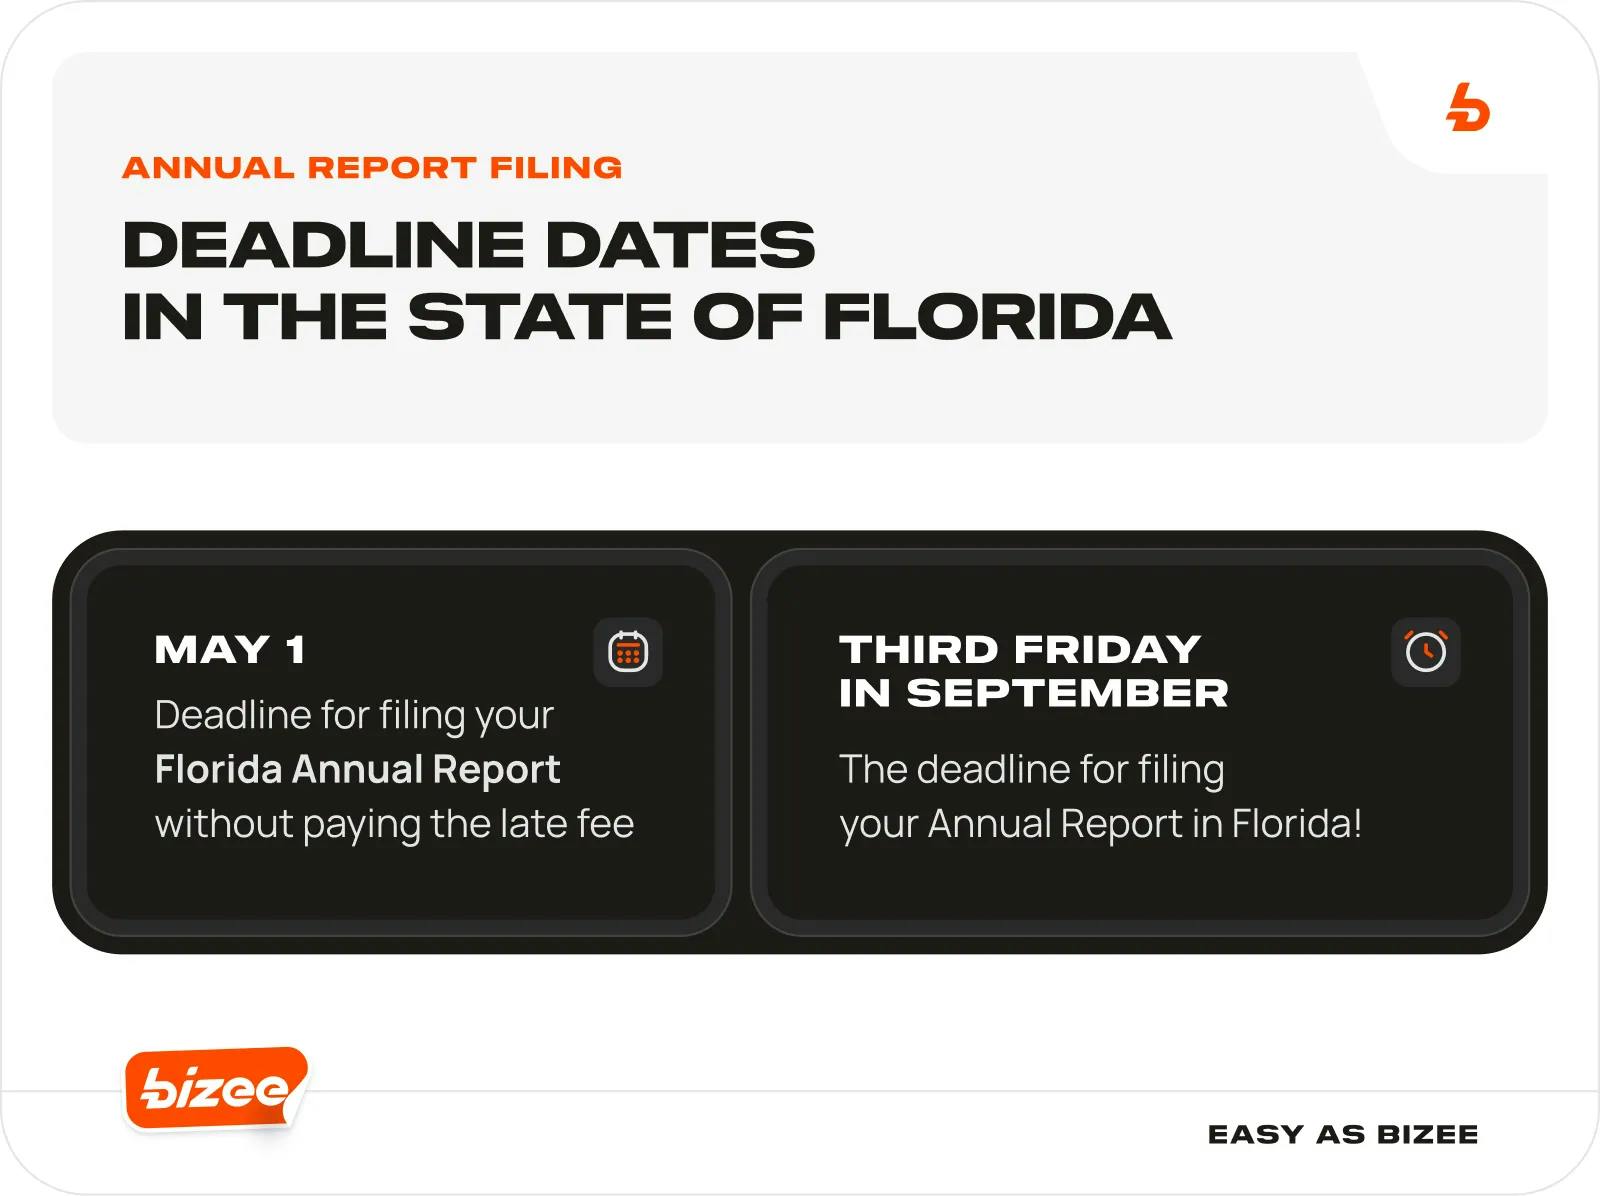 Annual Report Filing Deadline Dates in the State of Florida